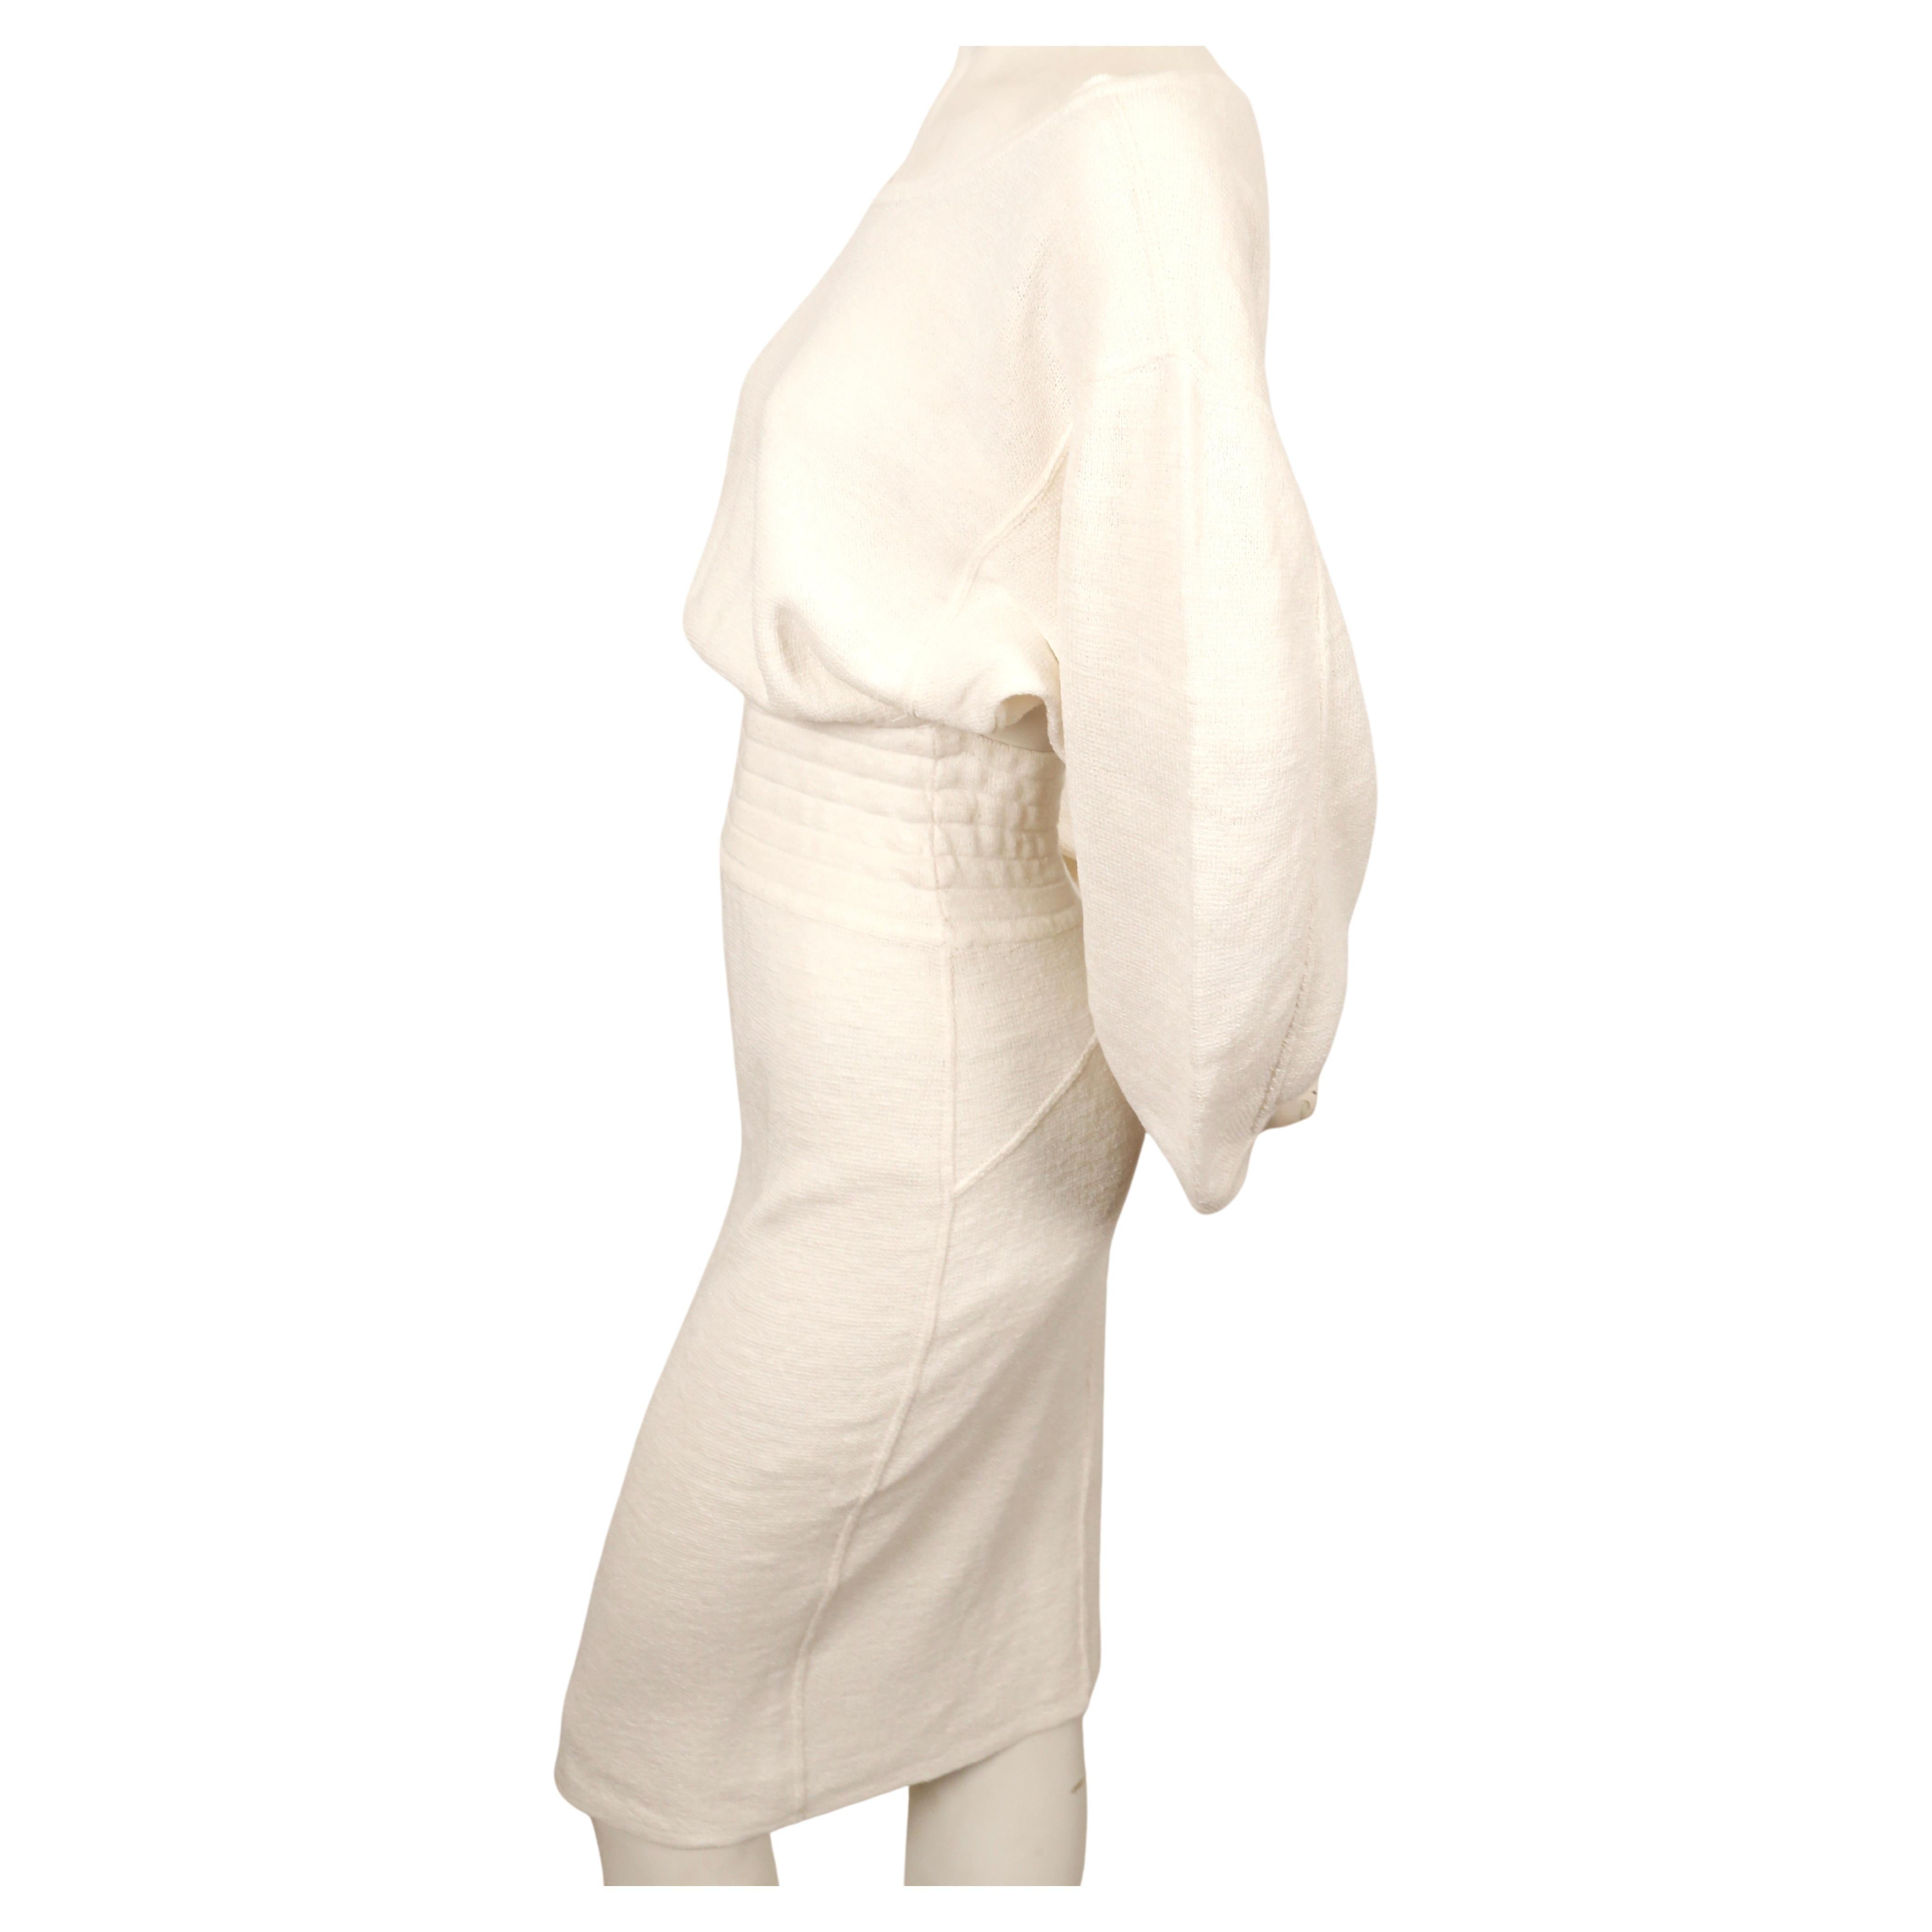 Very rare, off-white linen dress with elasticized waist and cut out back from Azzedine Alaia dating to 1985. Approximate size 'S'. Approximate measurements: drop shoulder 20